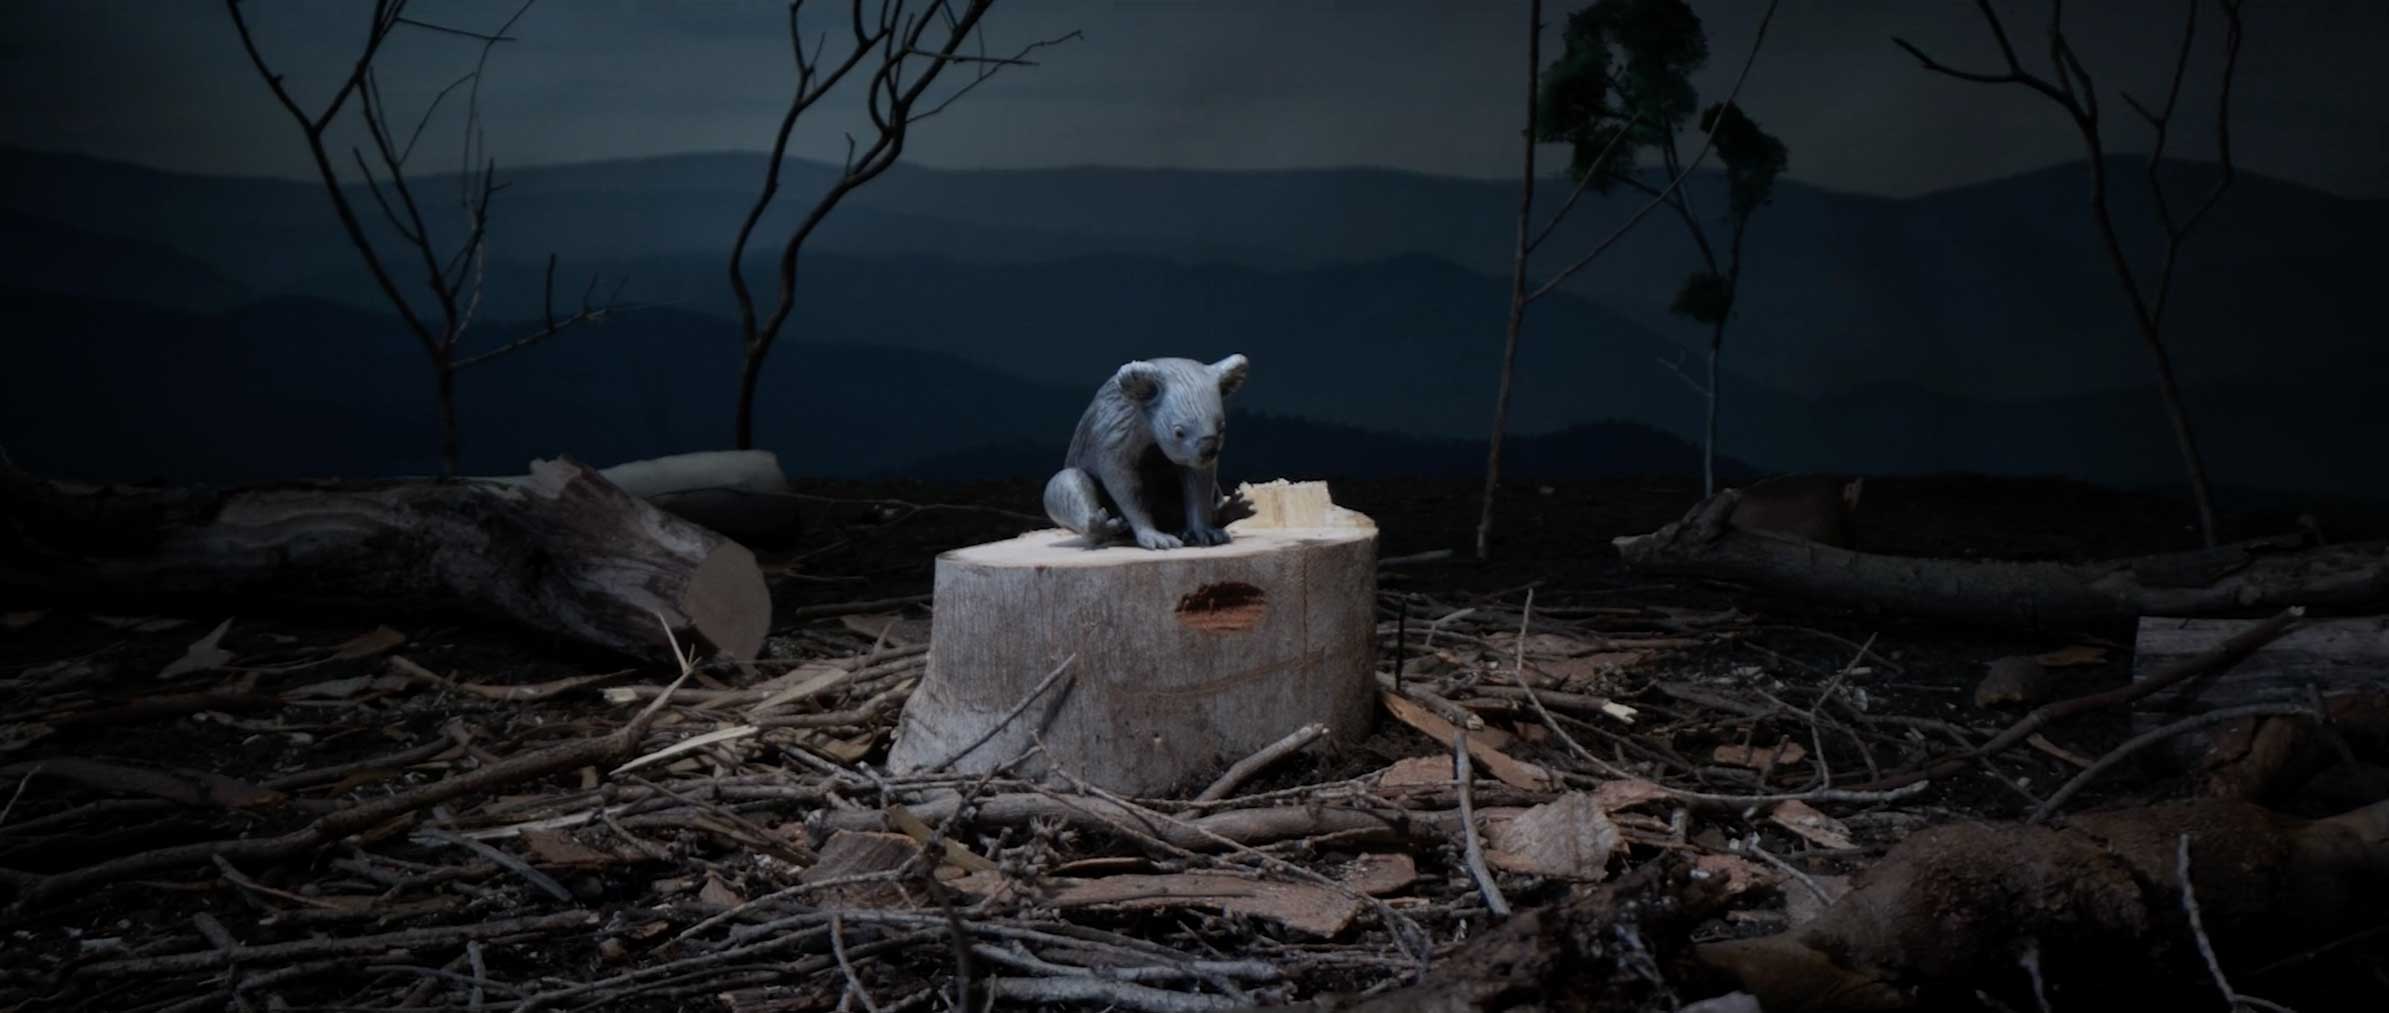 Dropbear and Photoplay For Greenpeace Forests | STASH MAGAZINE